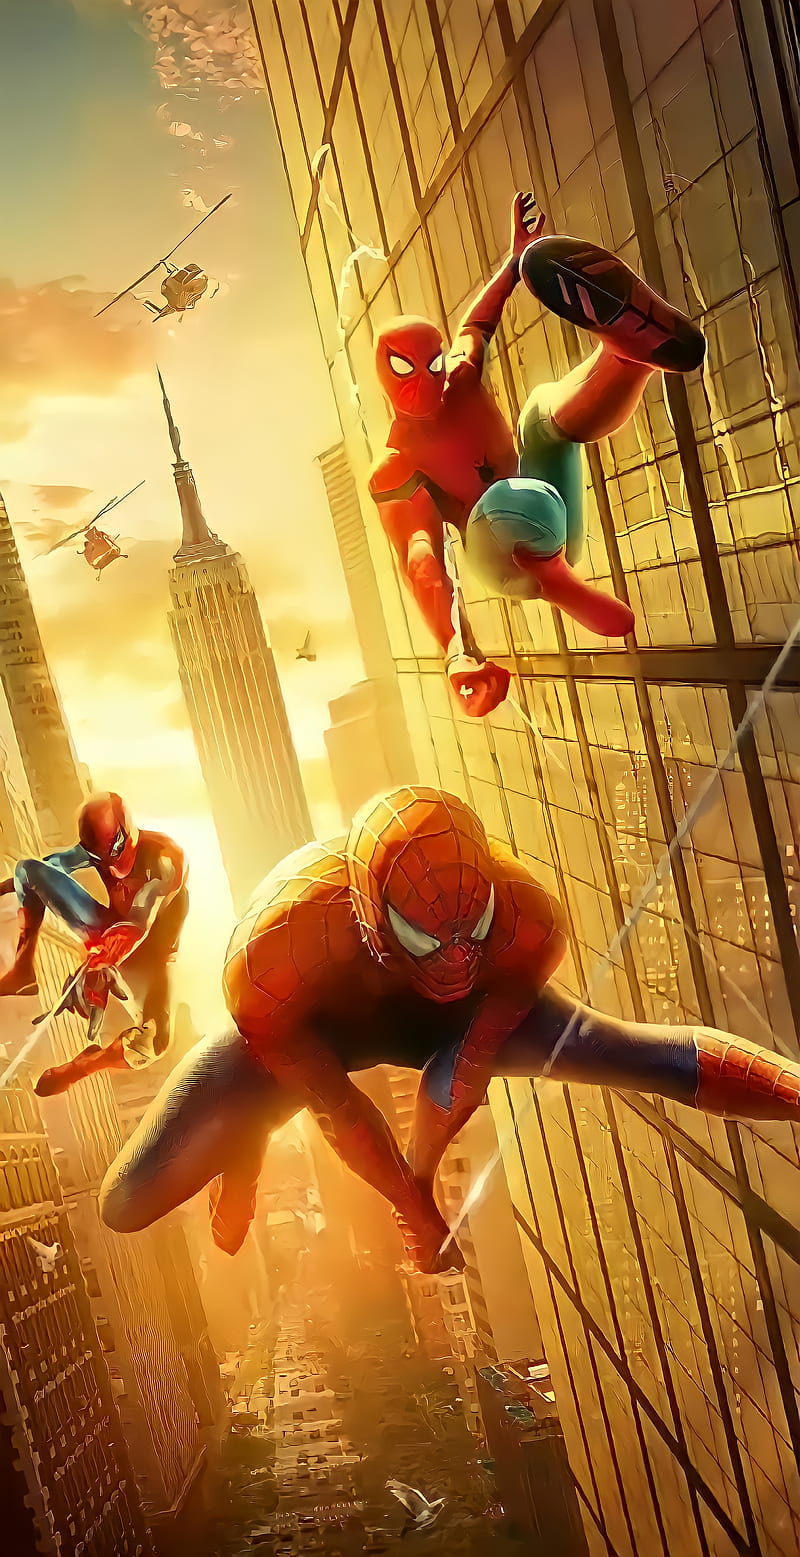 for ios download Spider-Man: No Way Home